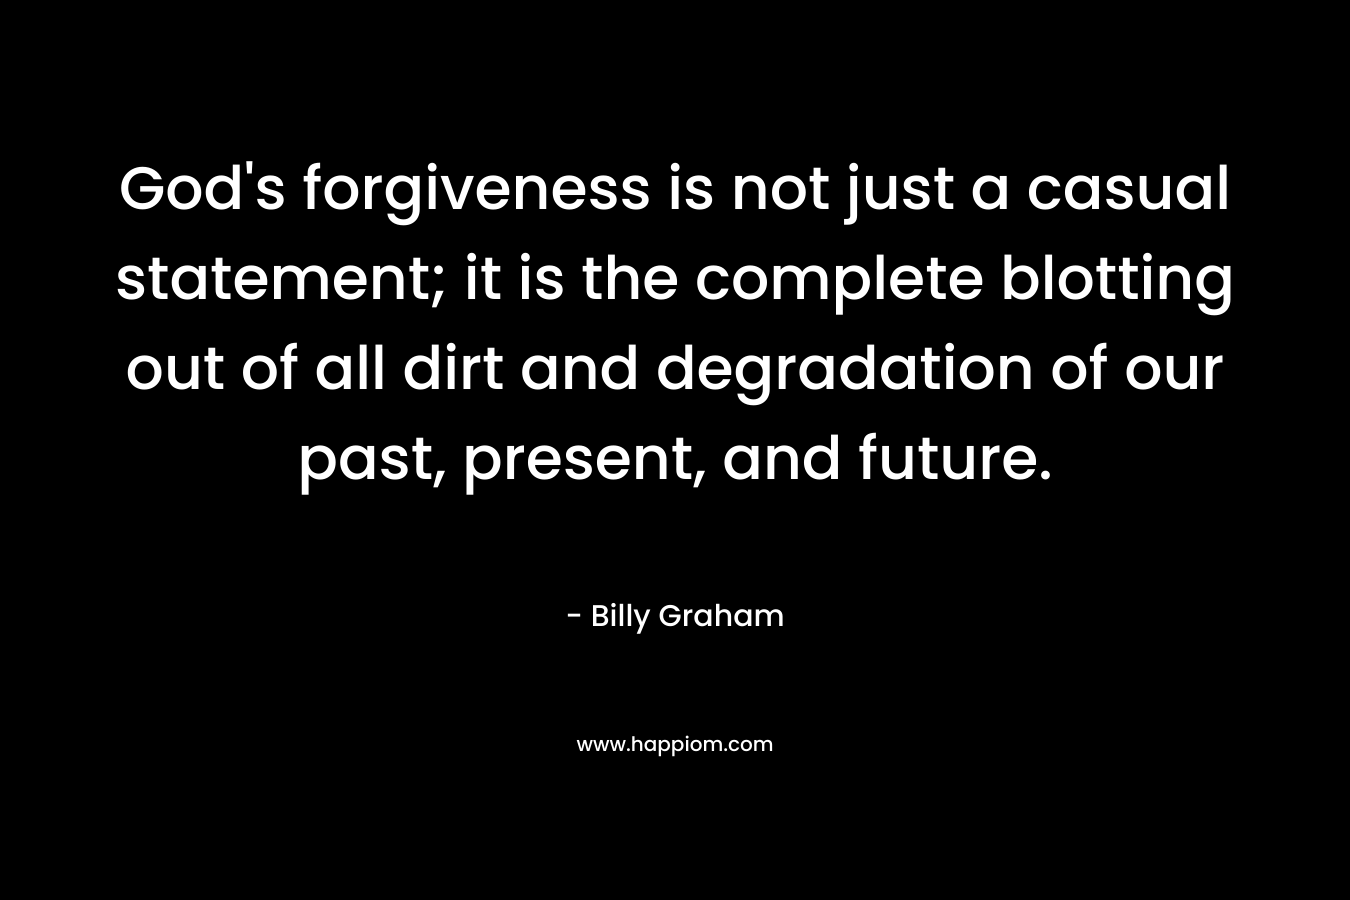 God’s forgiveness is not just a casual statement; it is the complete blotting out of all dirt and degradation of our past, present, and future. – Billy Graham